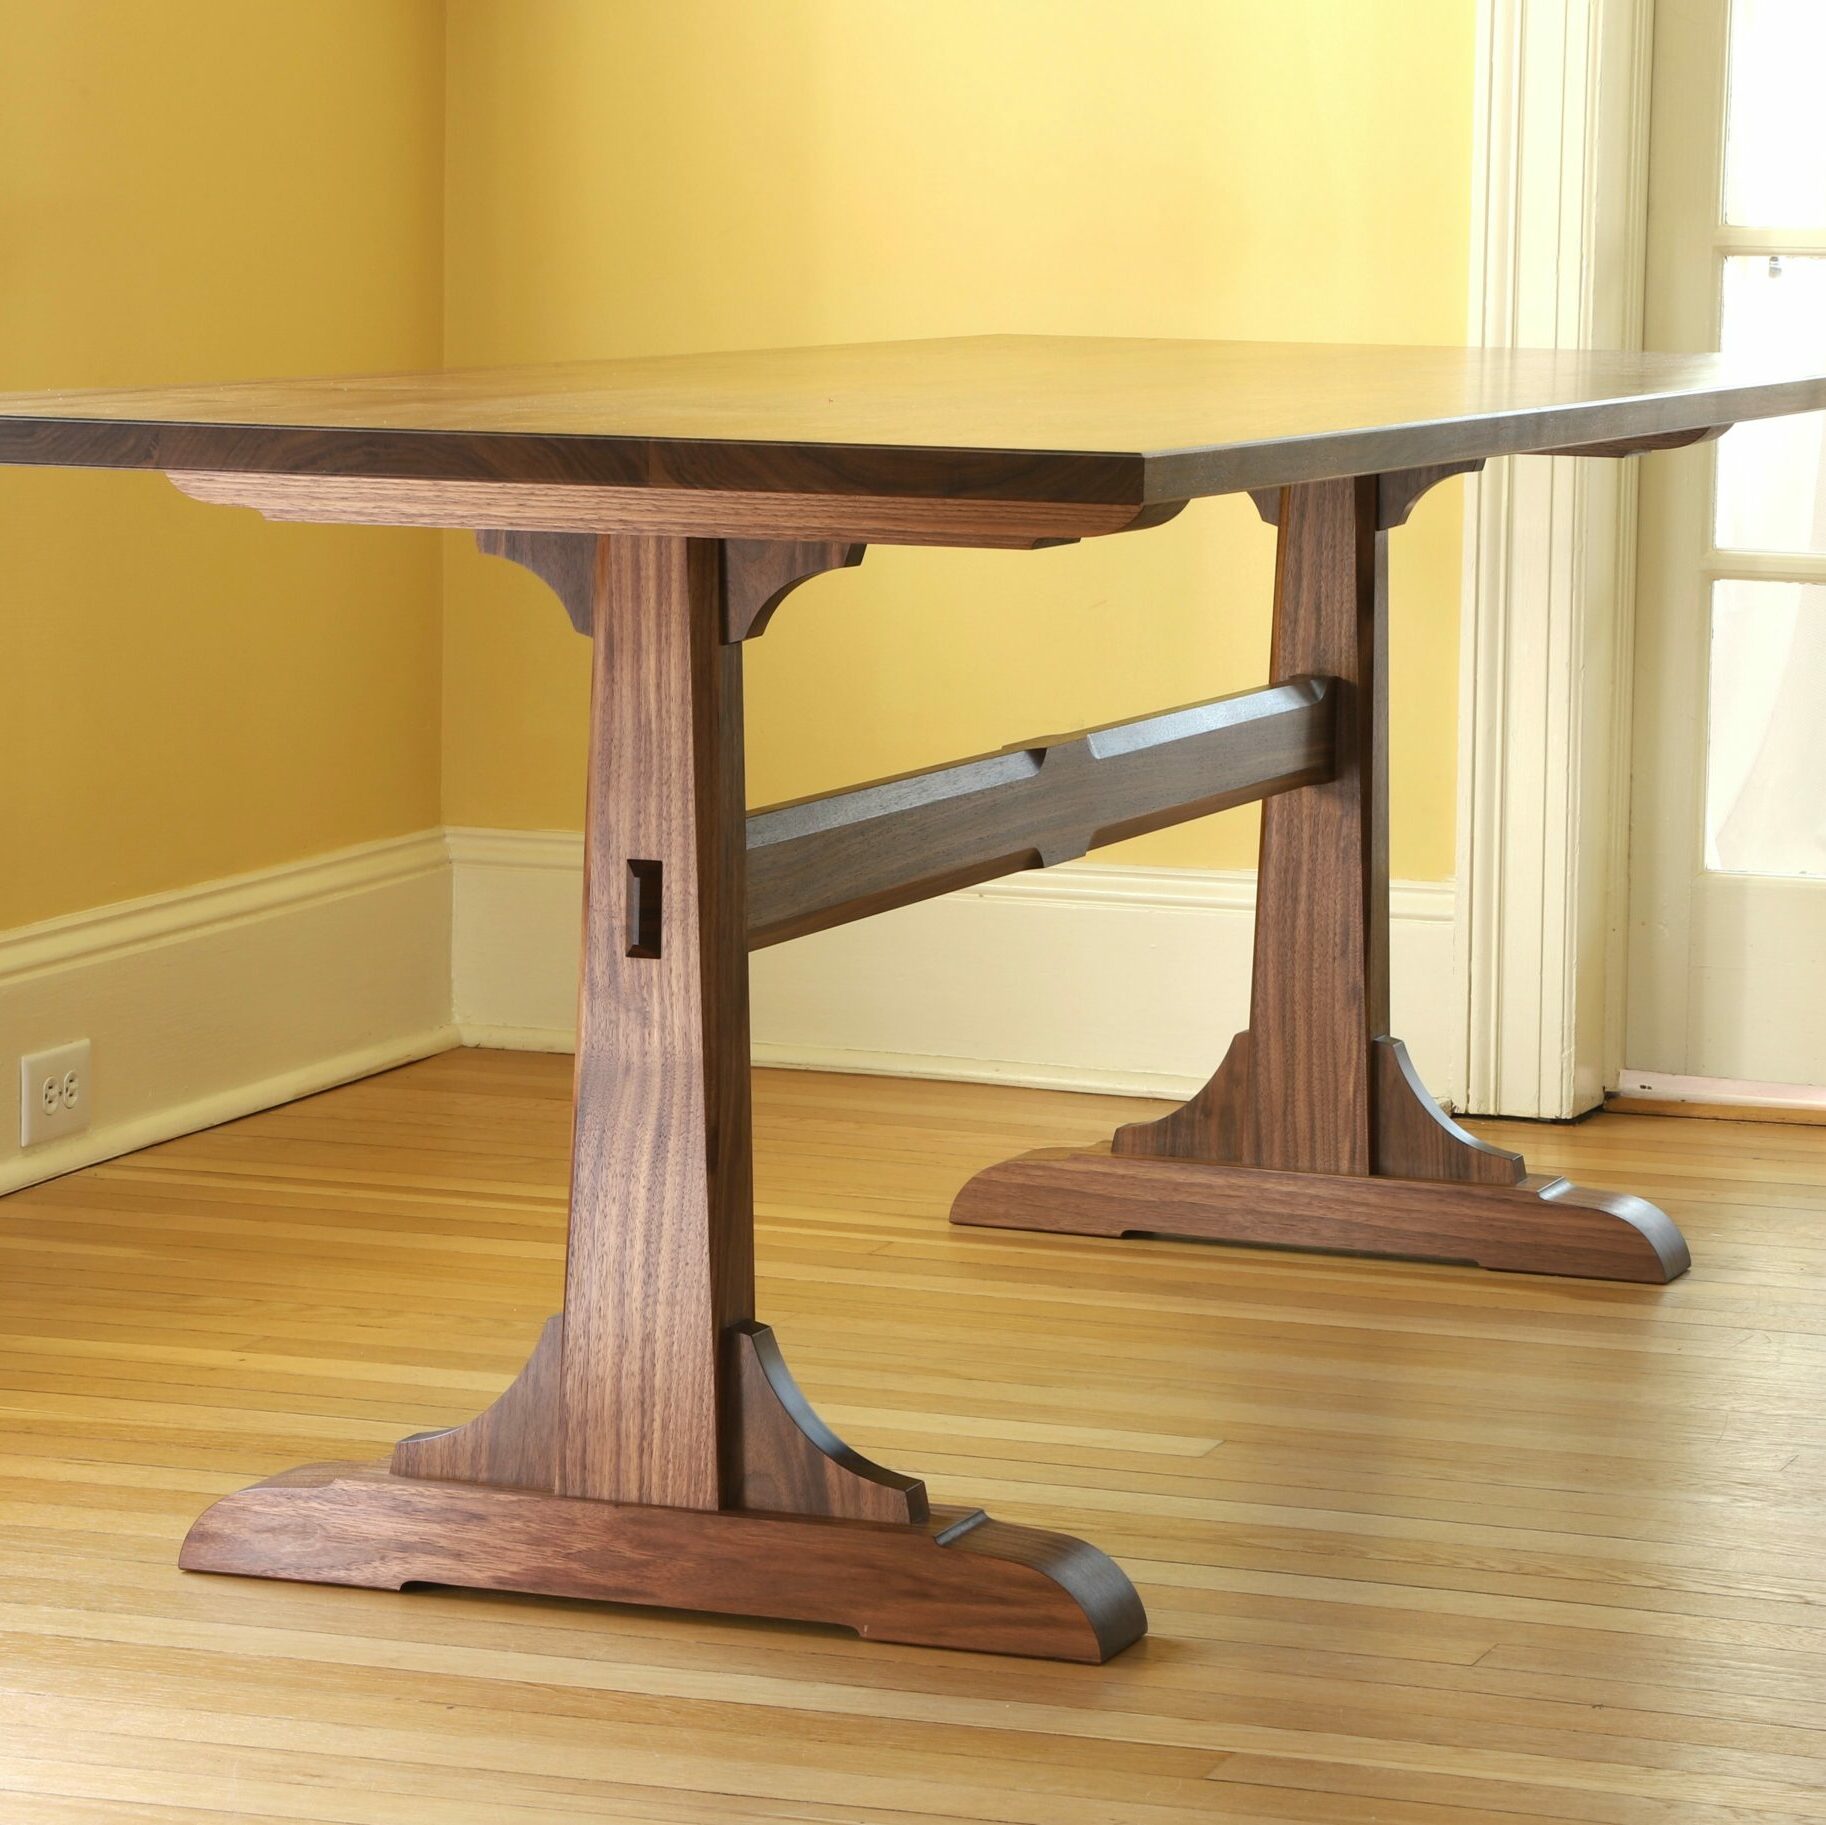 A walnut trestle table sits in a room with yellow walls and a hardwood floor.